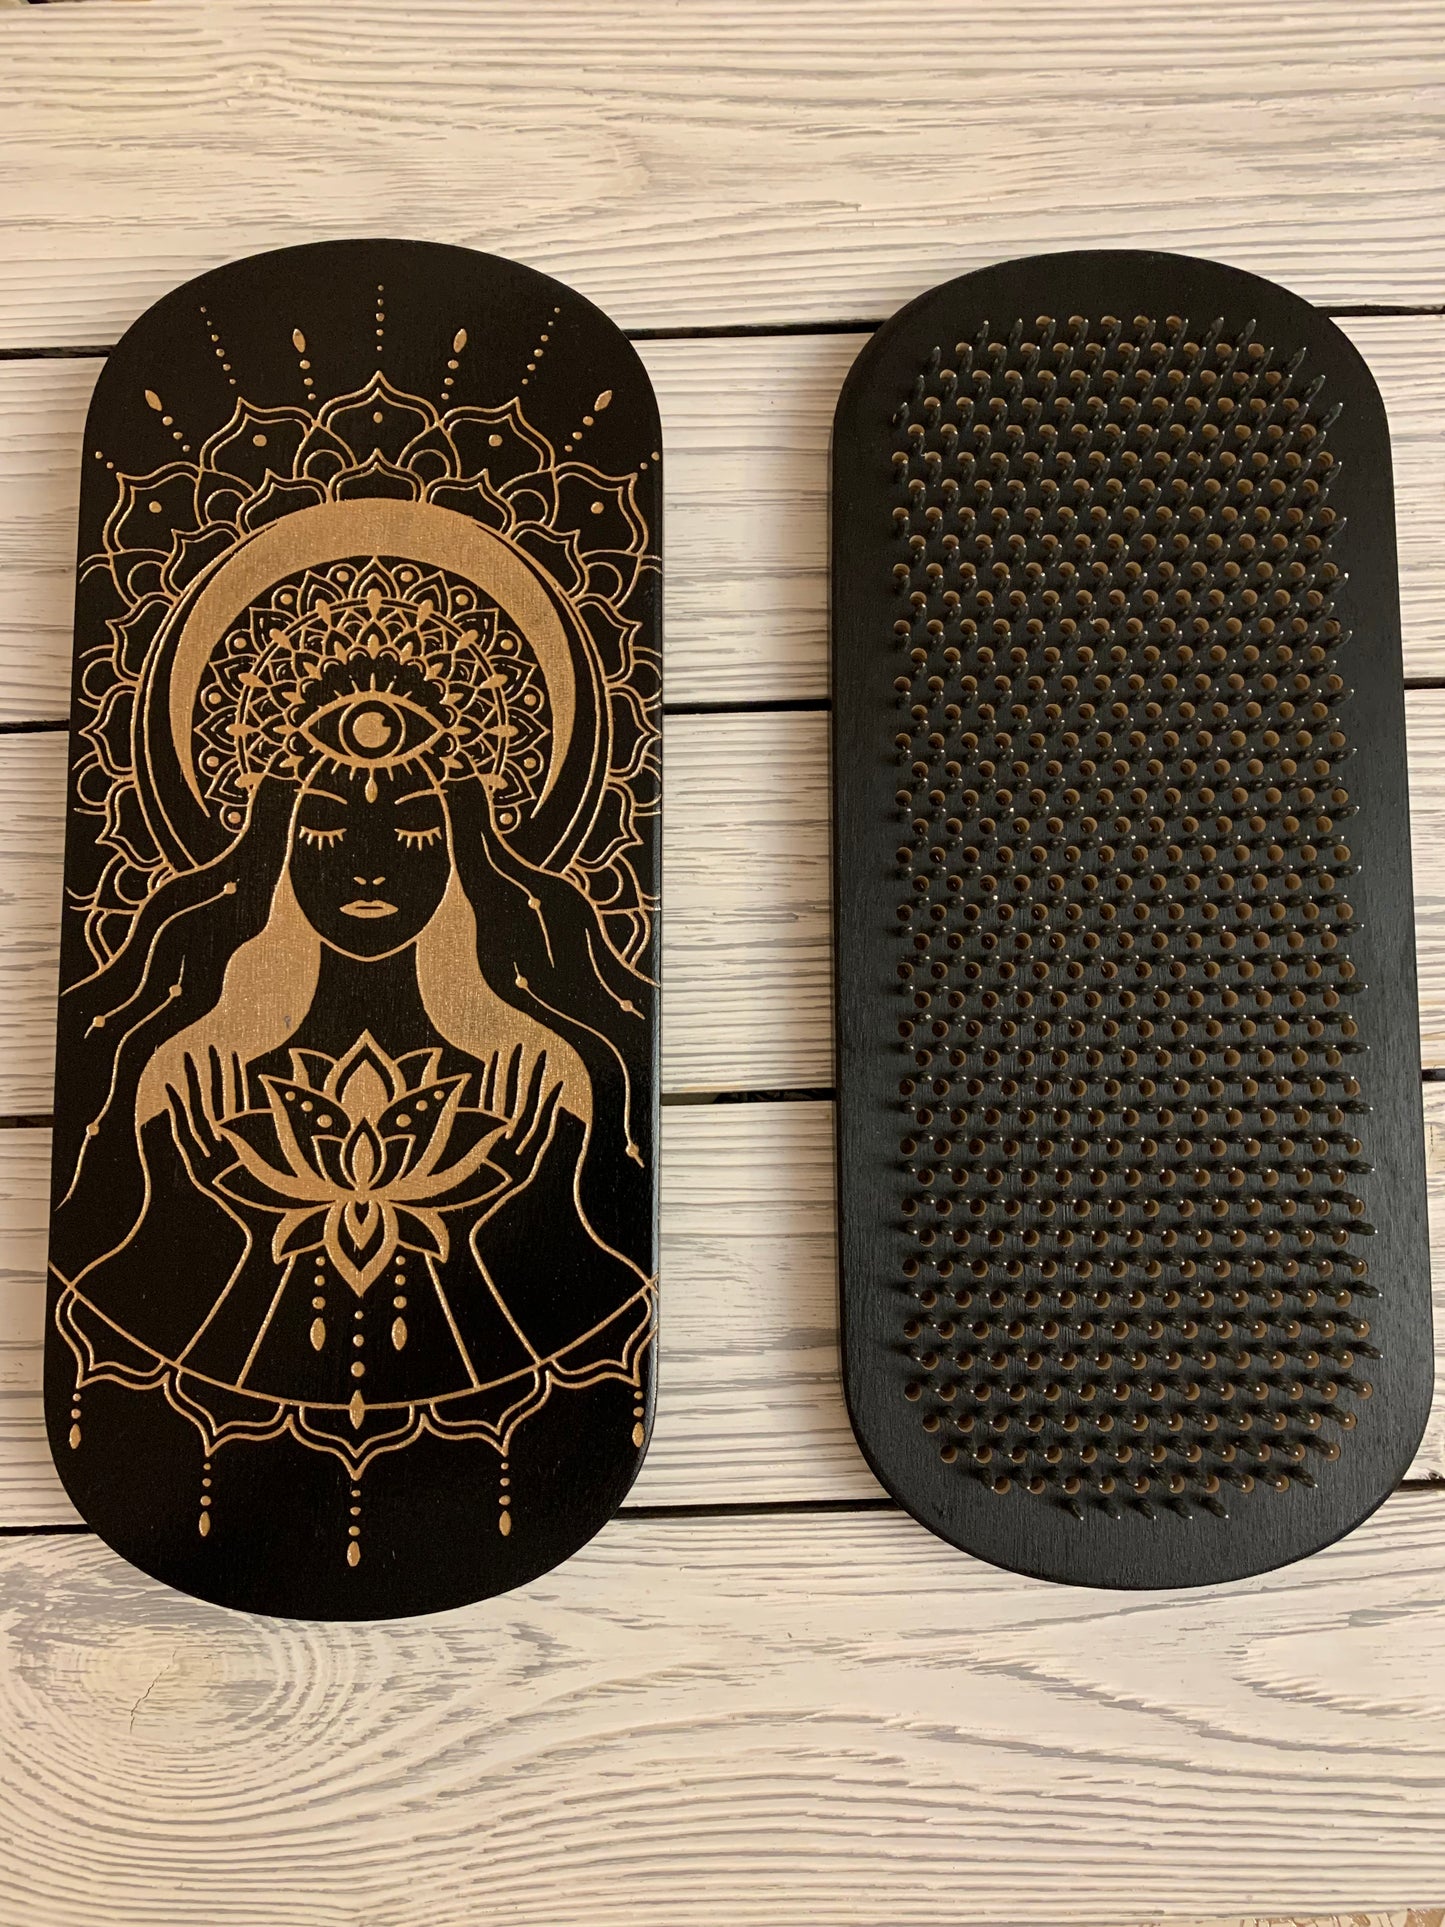 Sadhu board with ballistic nails bullet and forged steel. Gold color. 10 mm.